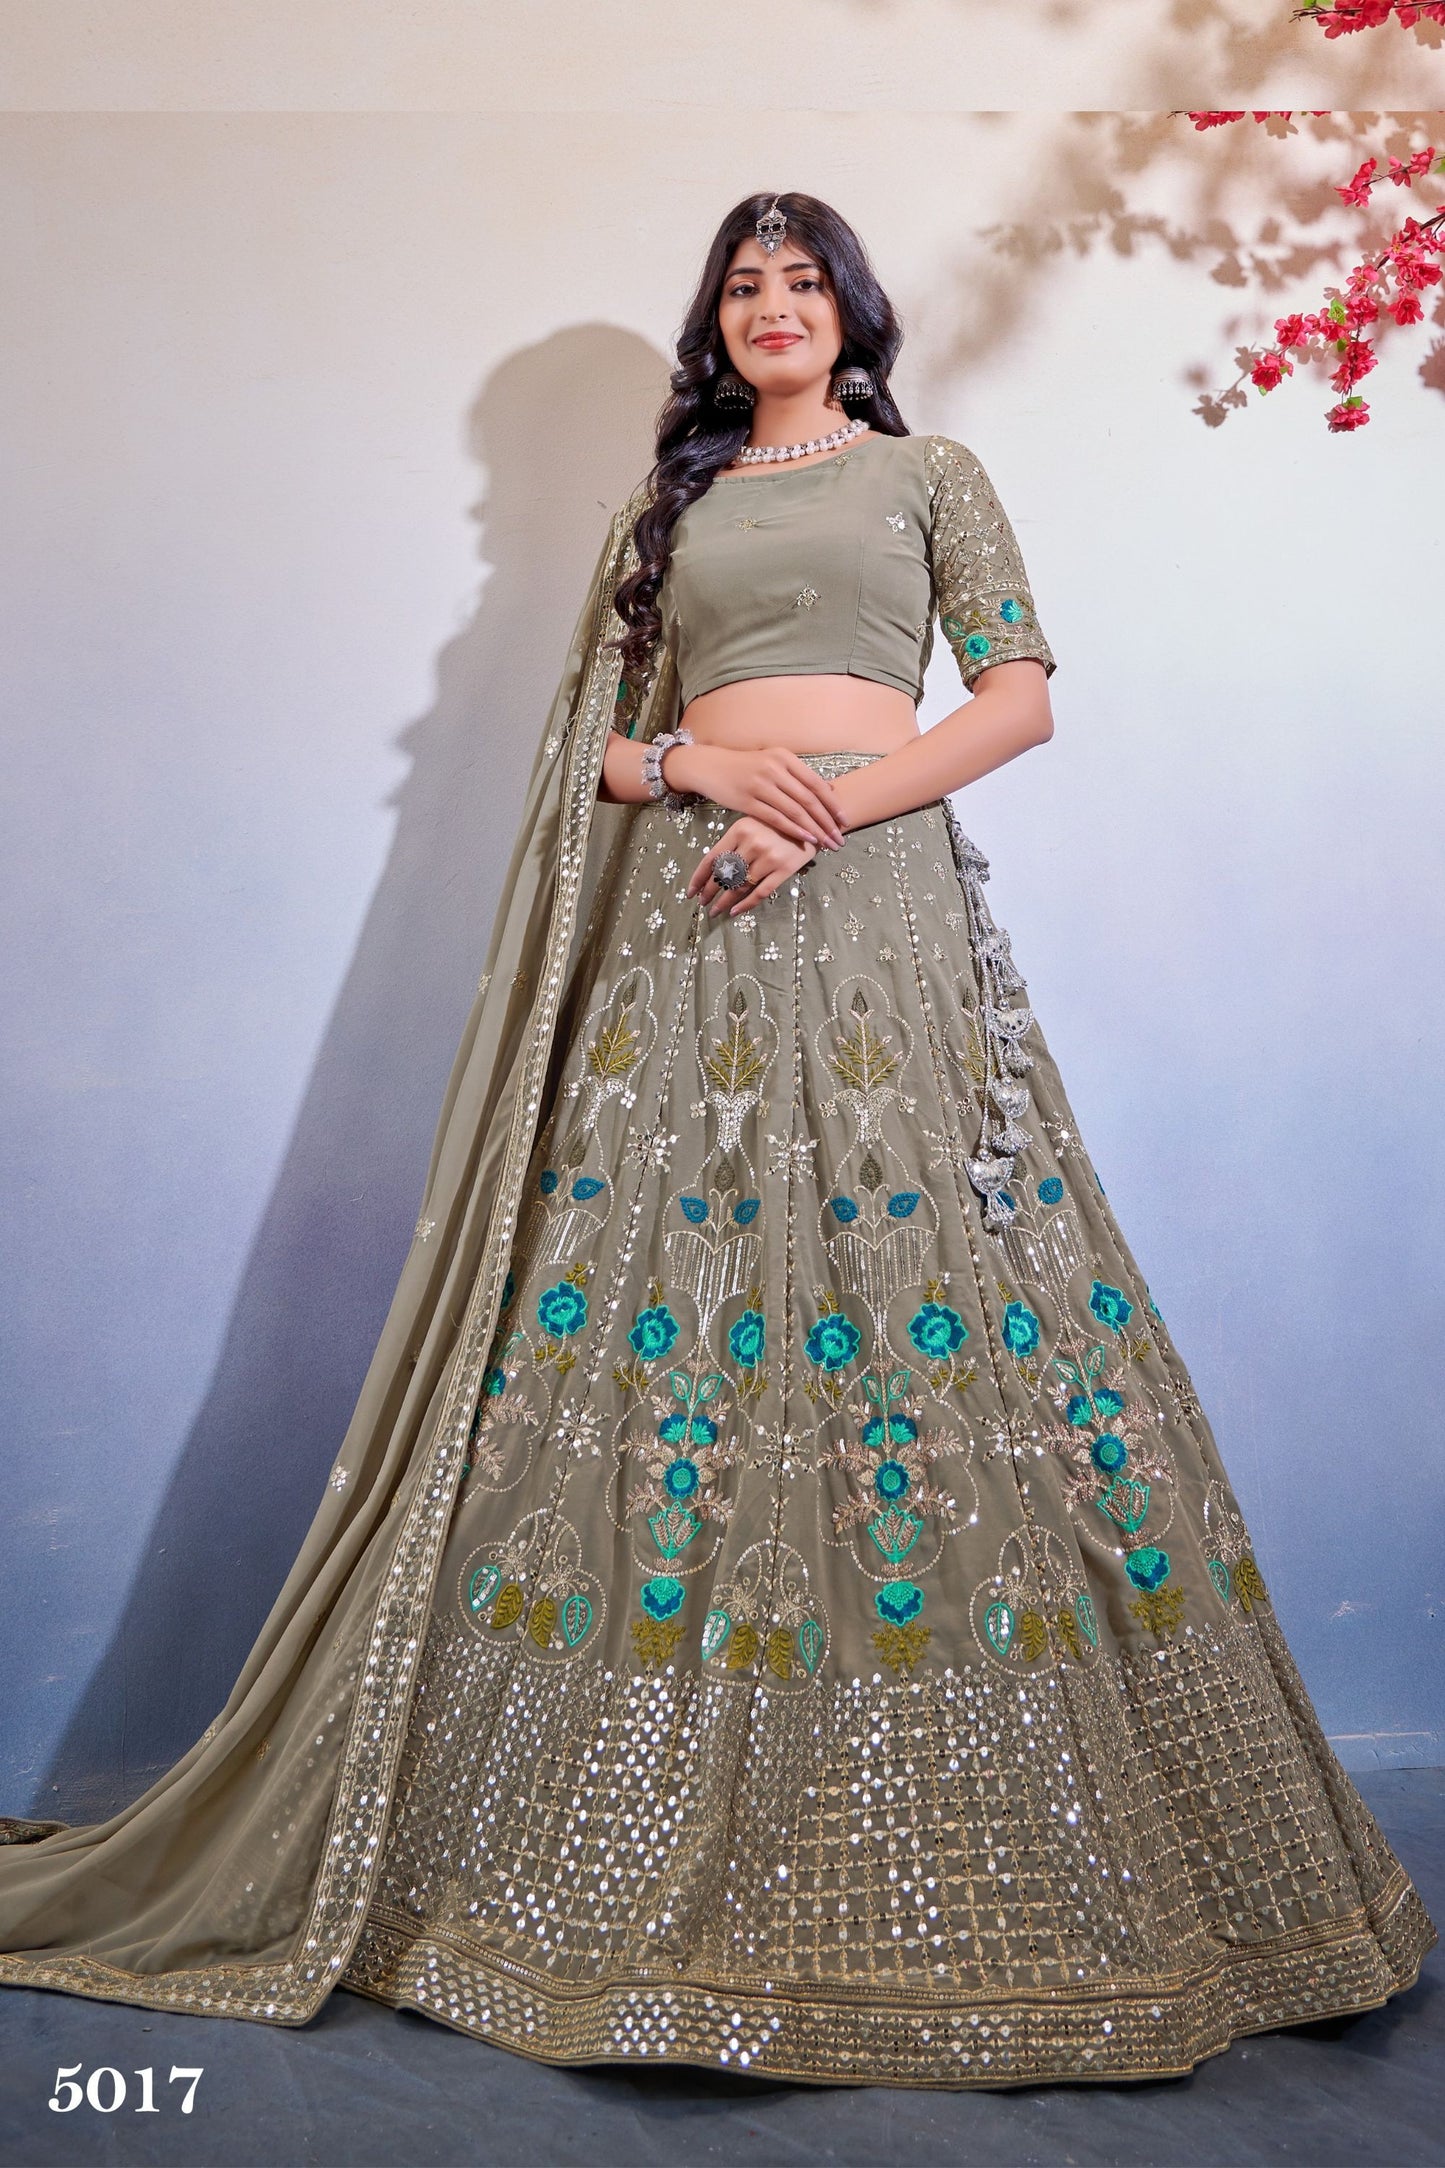 Dark Gray Georgette Flower Embroidered Lehenga Choli For Indian Festivals & Weddings - Sequence Embroidery Work